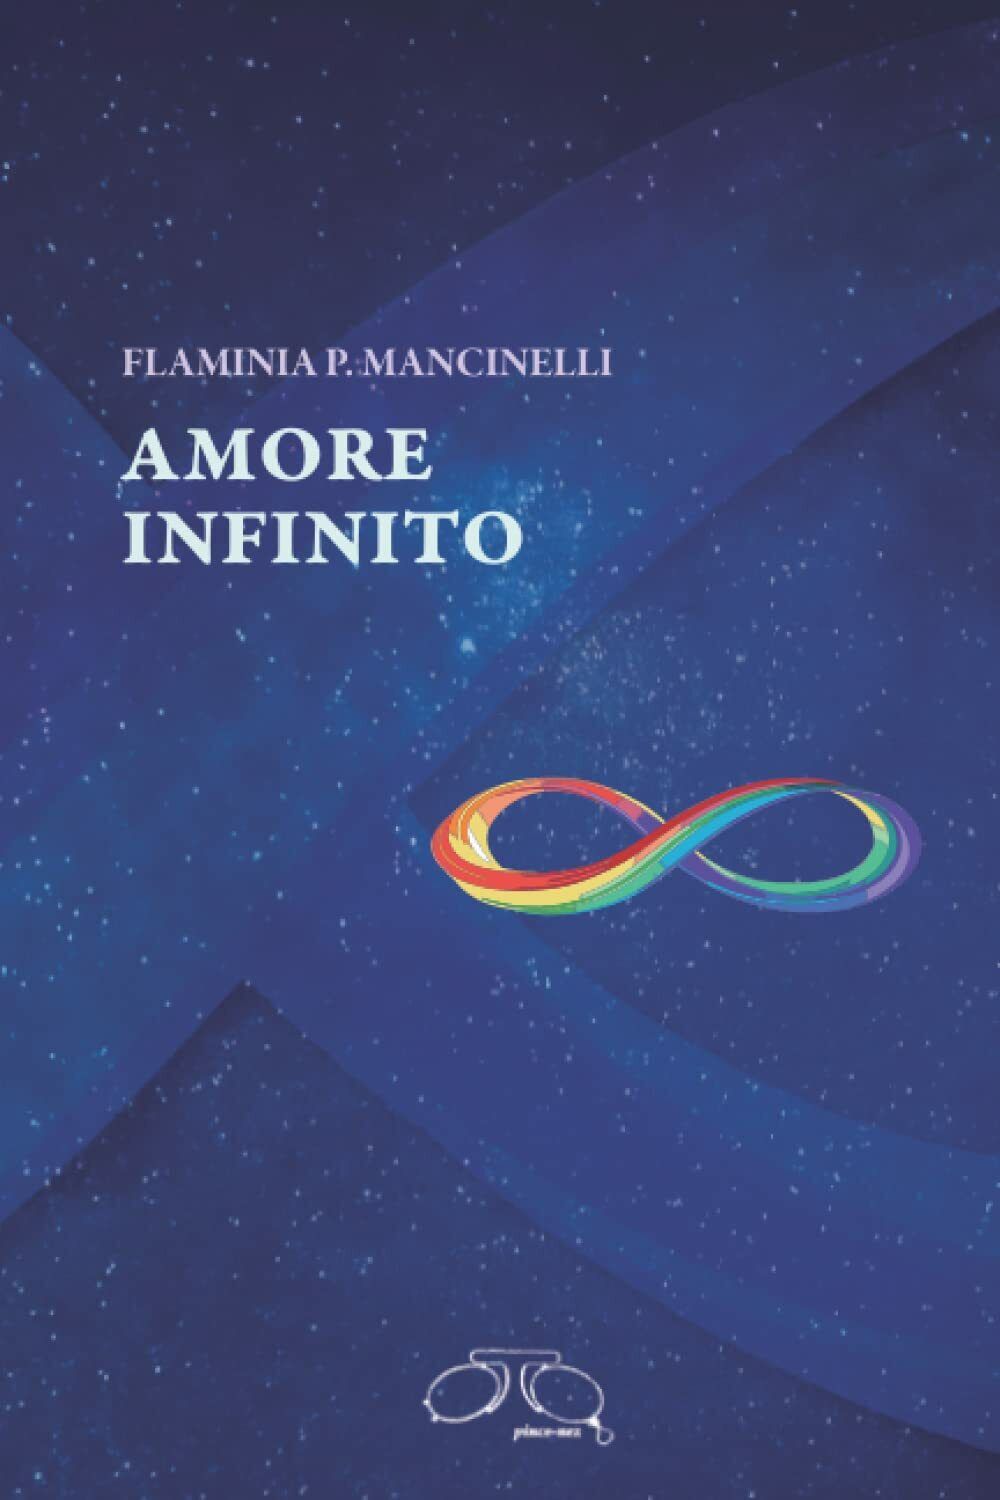 Amore infinito di Flaminia P. Mancinelli,  2022,  Indipendently Published